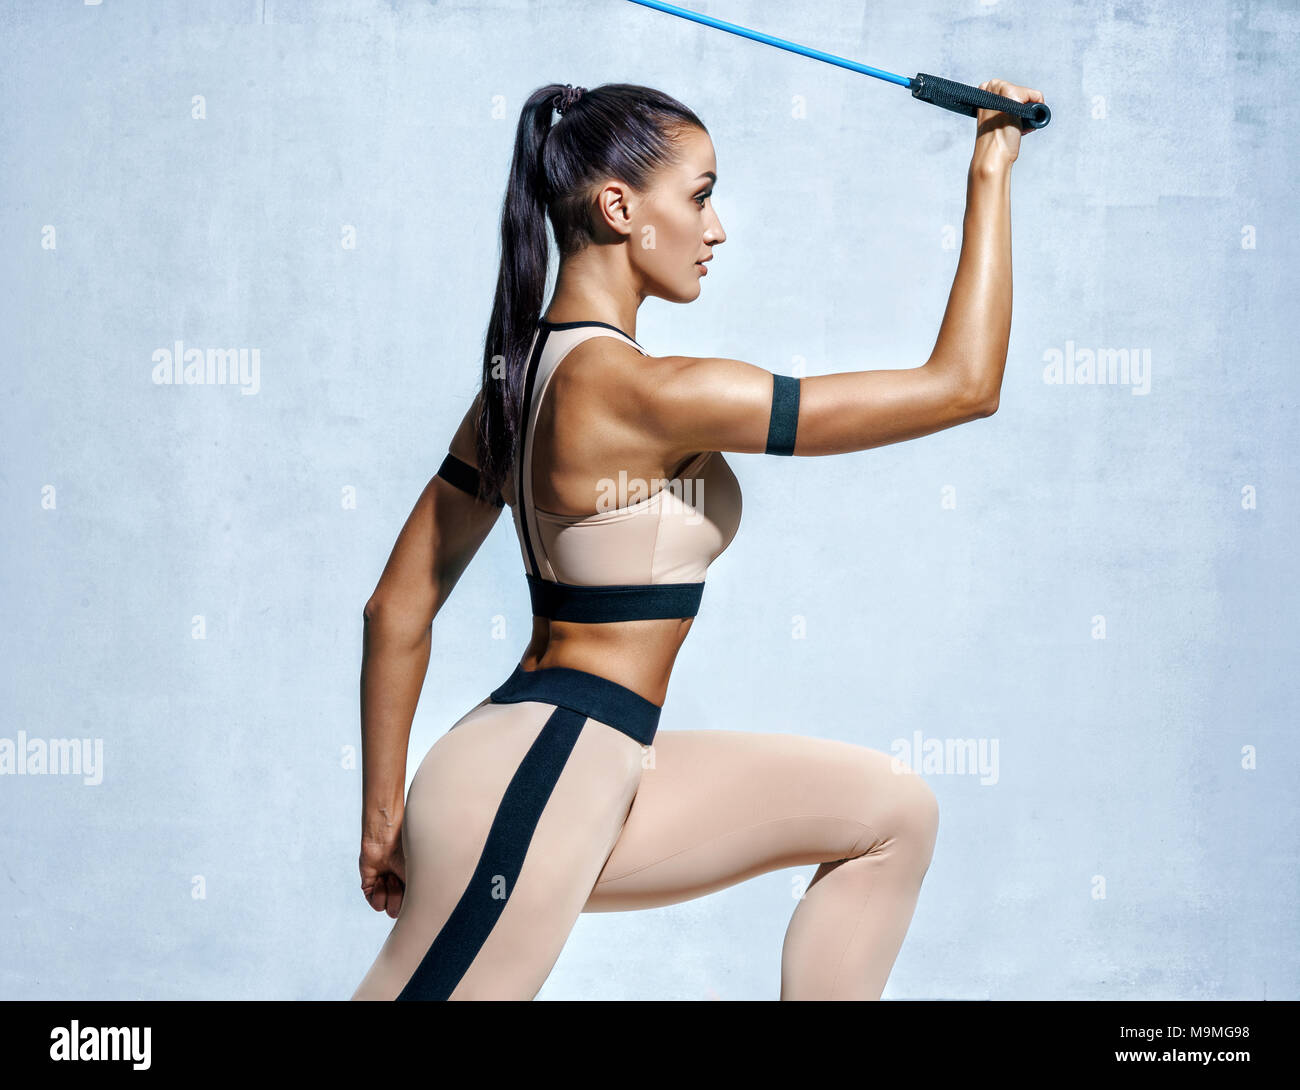 Strong woman using resistance band in her exercise routine. Photo of fitness model workout on grey background. Strength and motivation Stock Photo